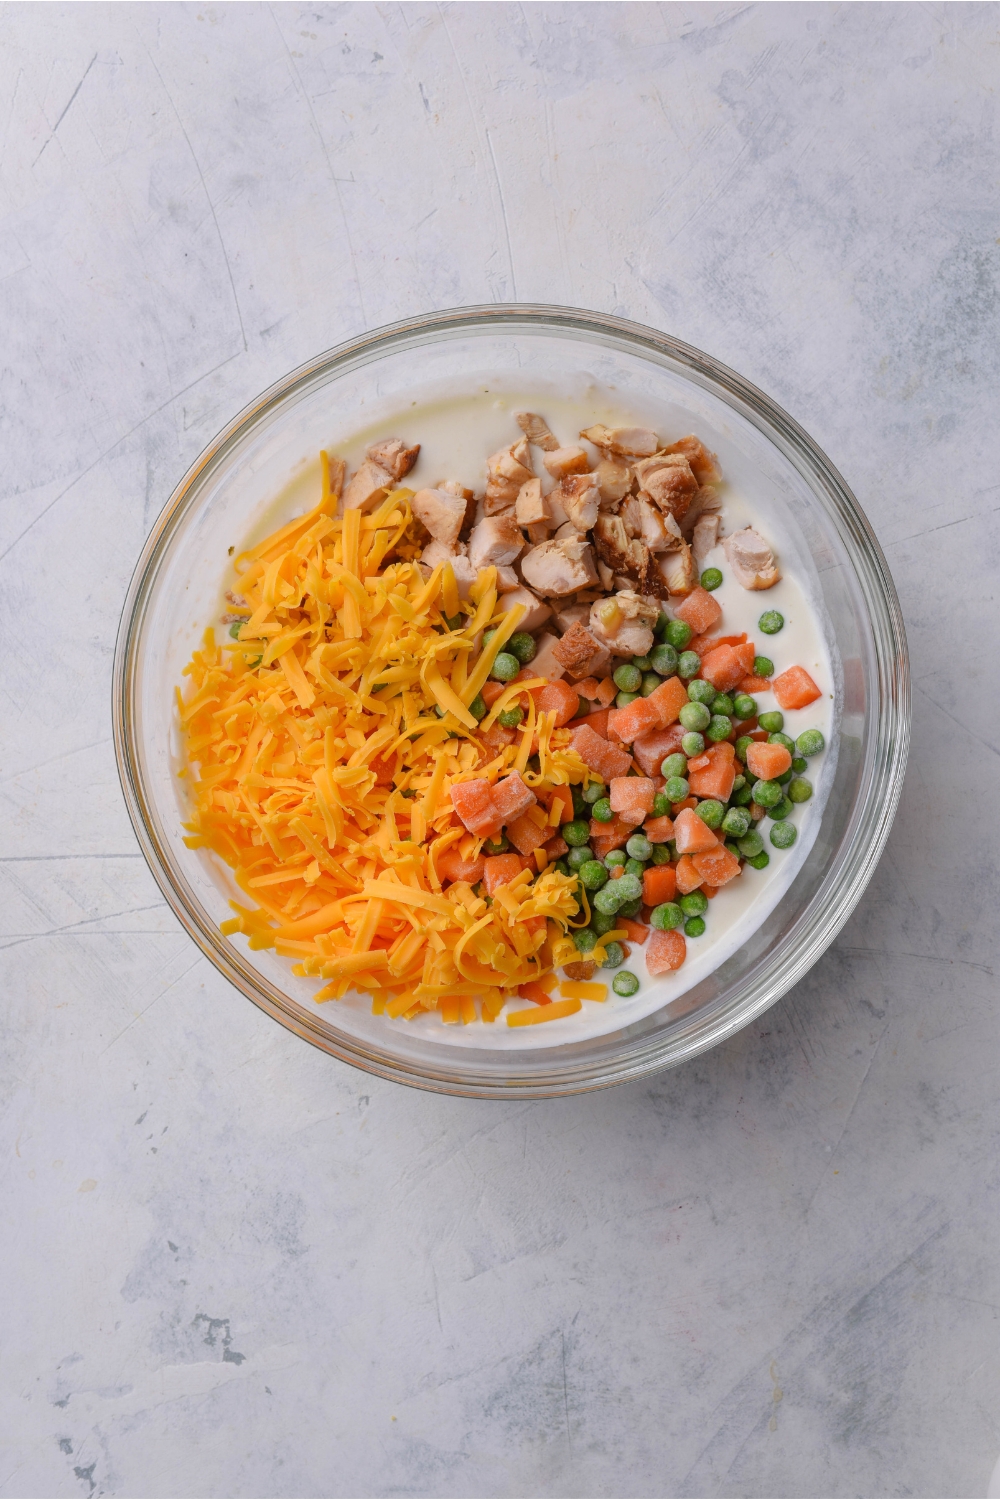 A clear bowl with diced chicken, peas, carrots, shredded cheese, and a creamy soup mixture.